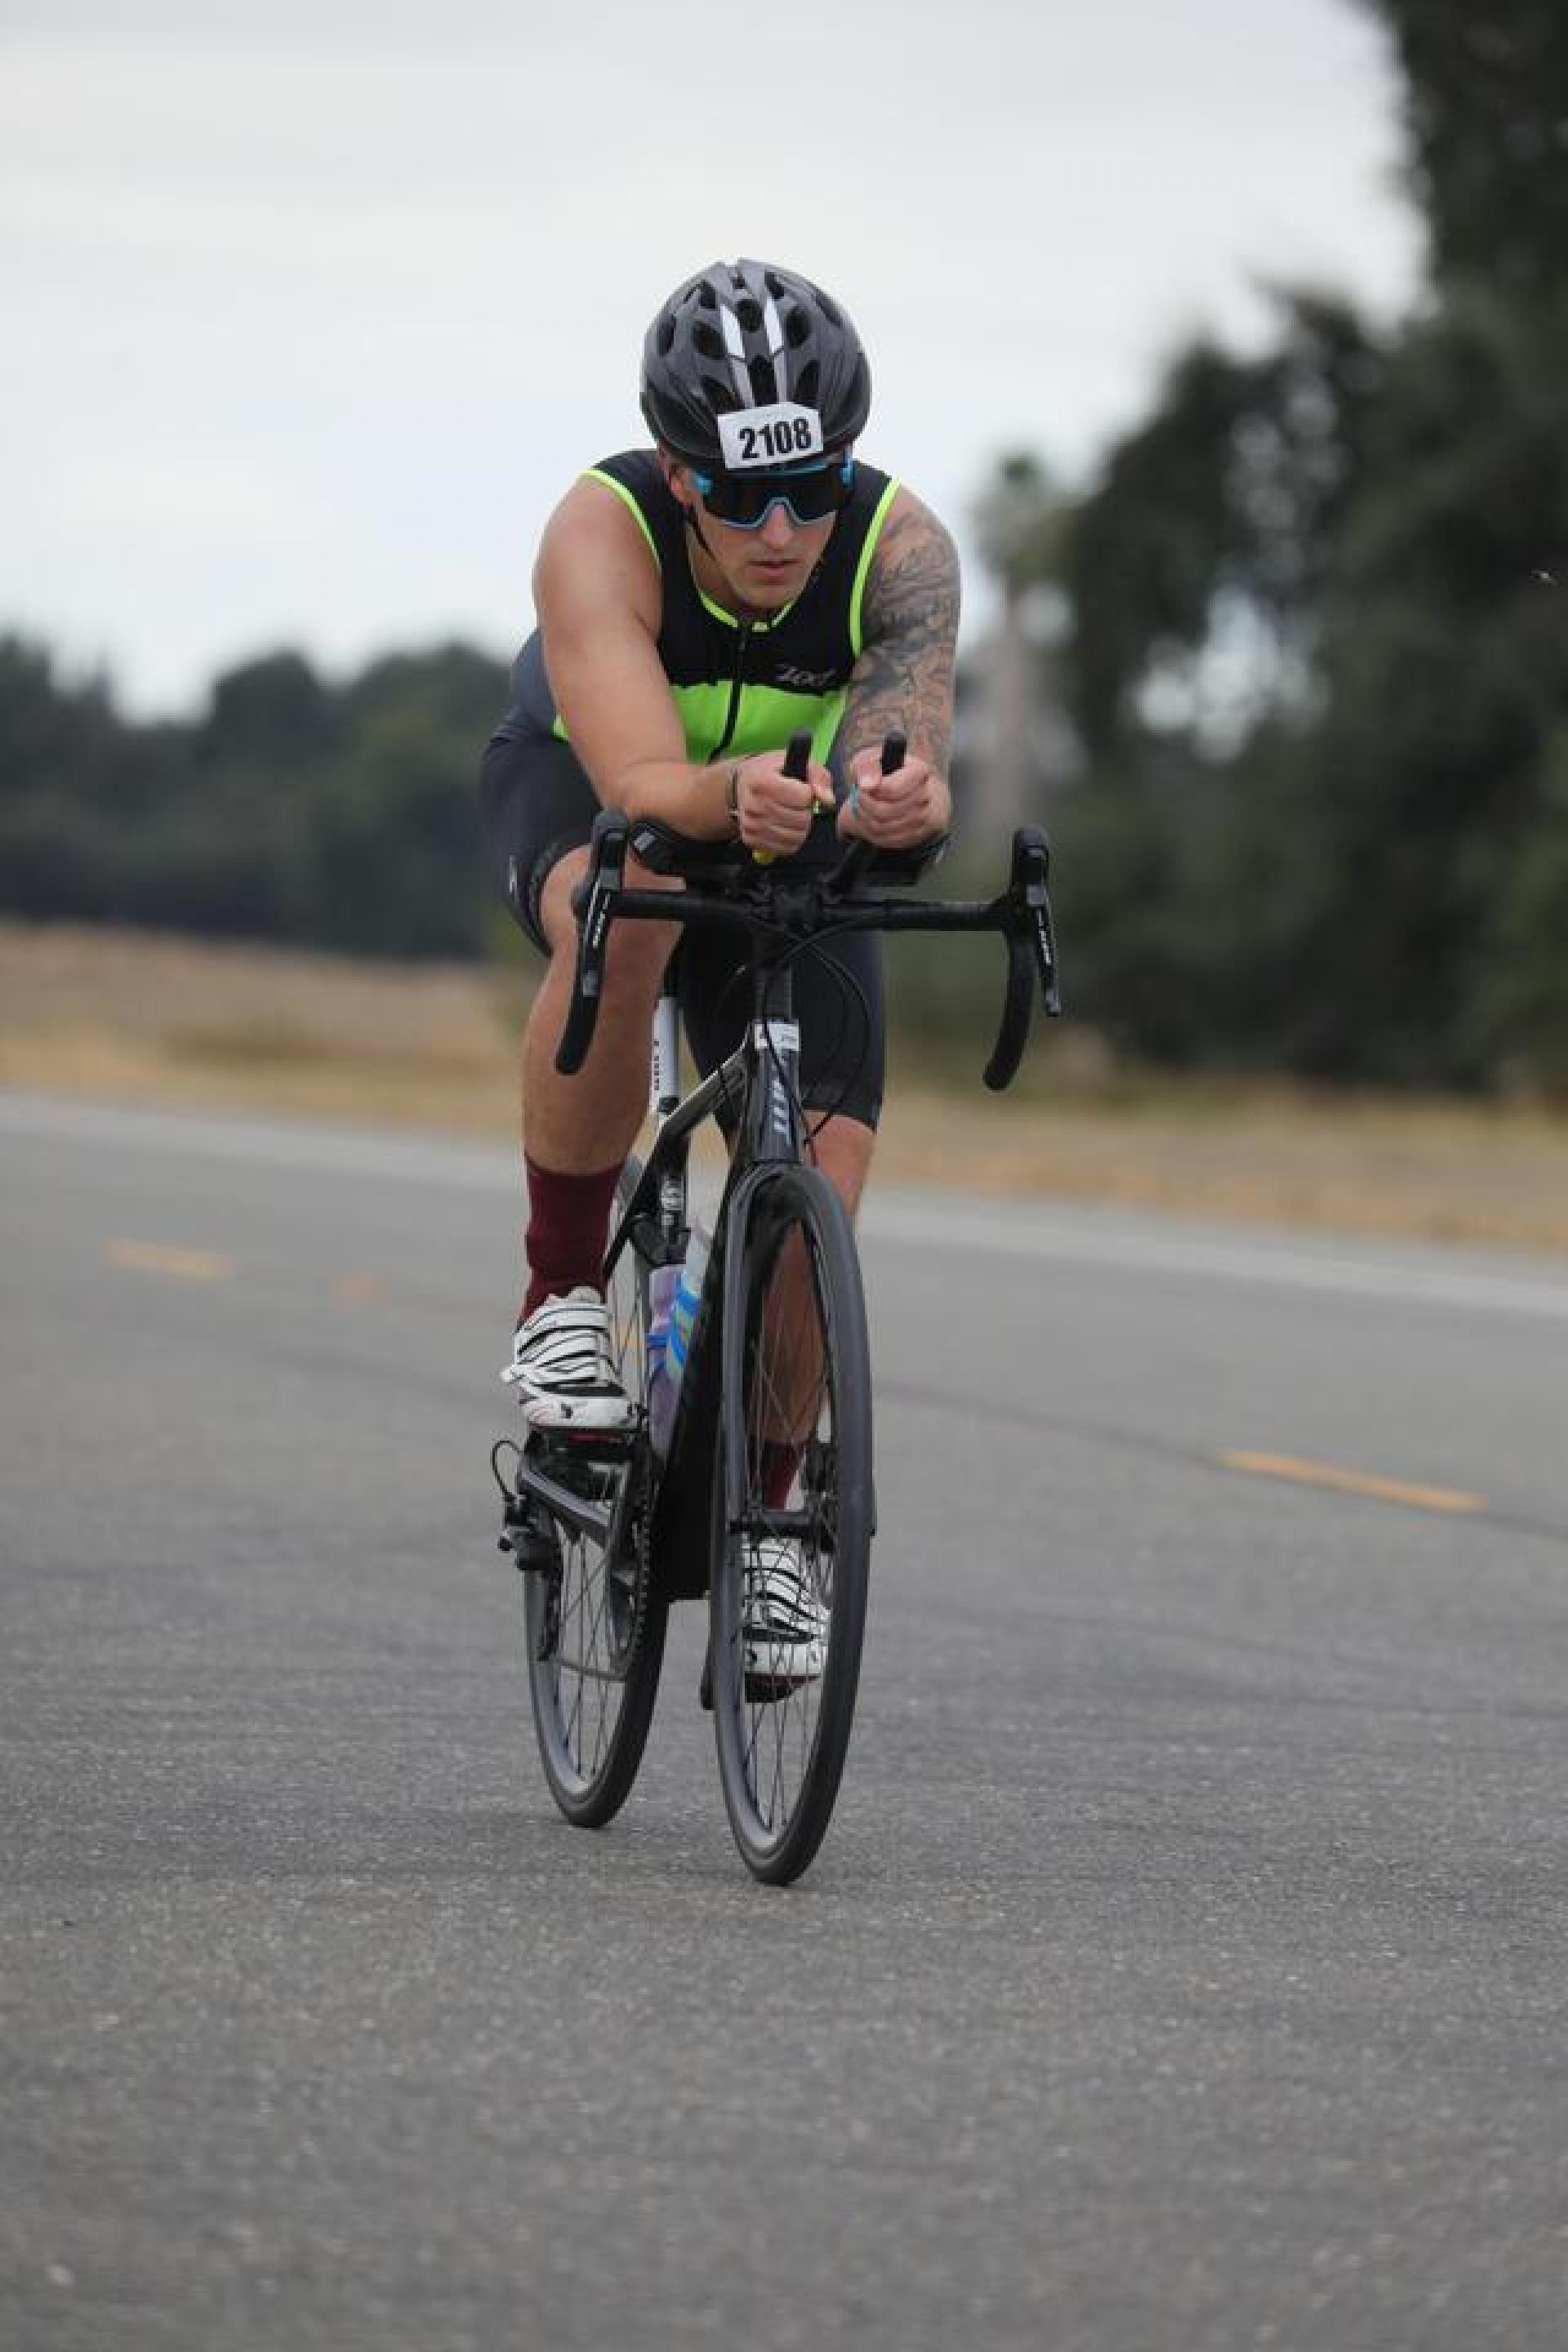 Kevin rides his bike during the Ironman. 